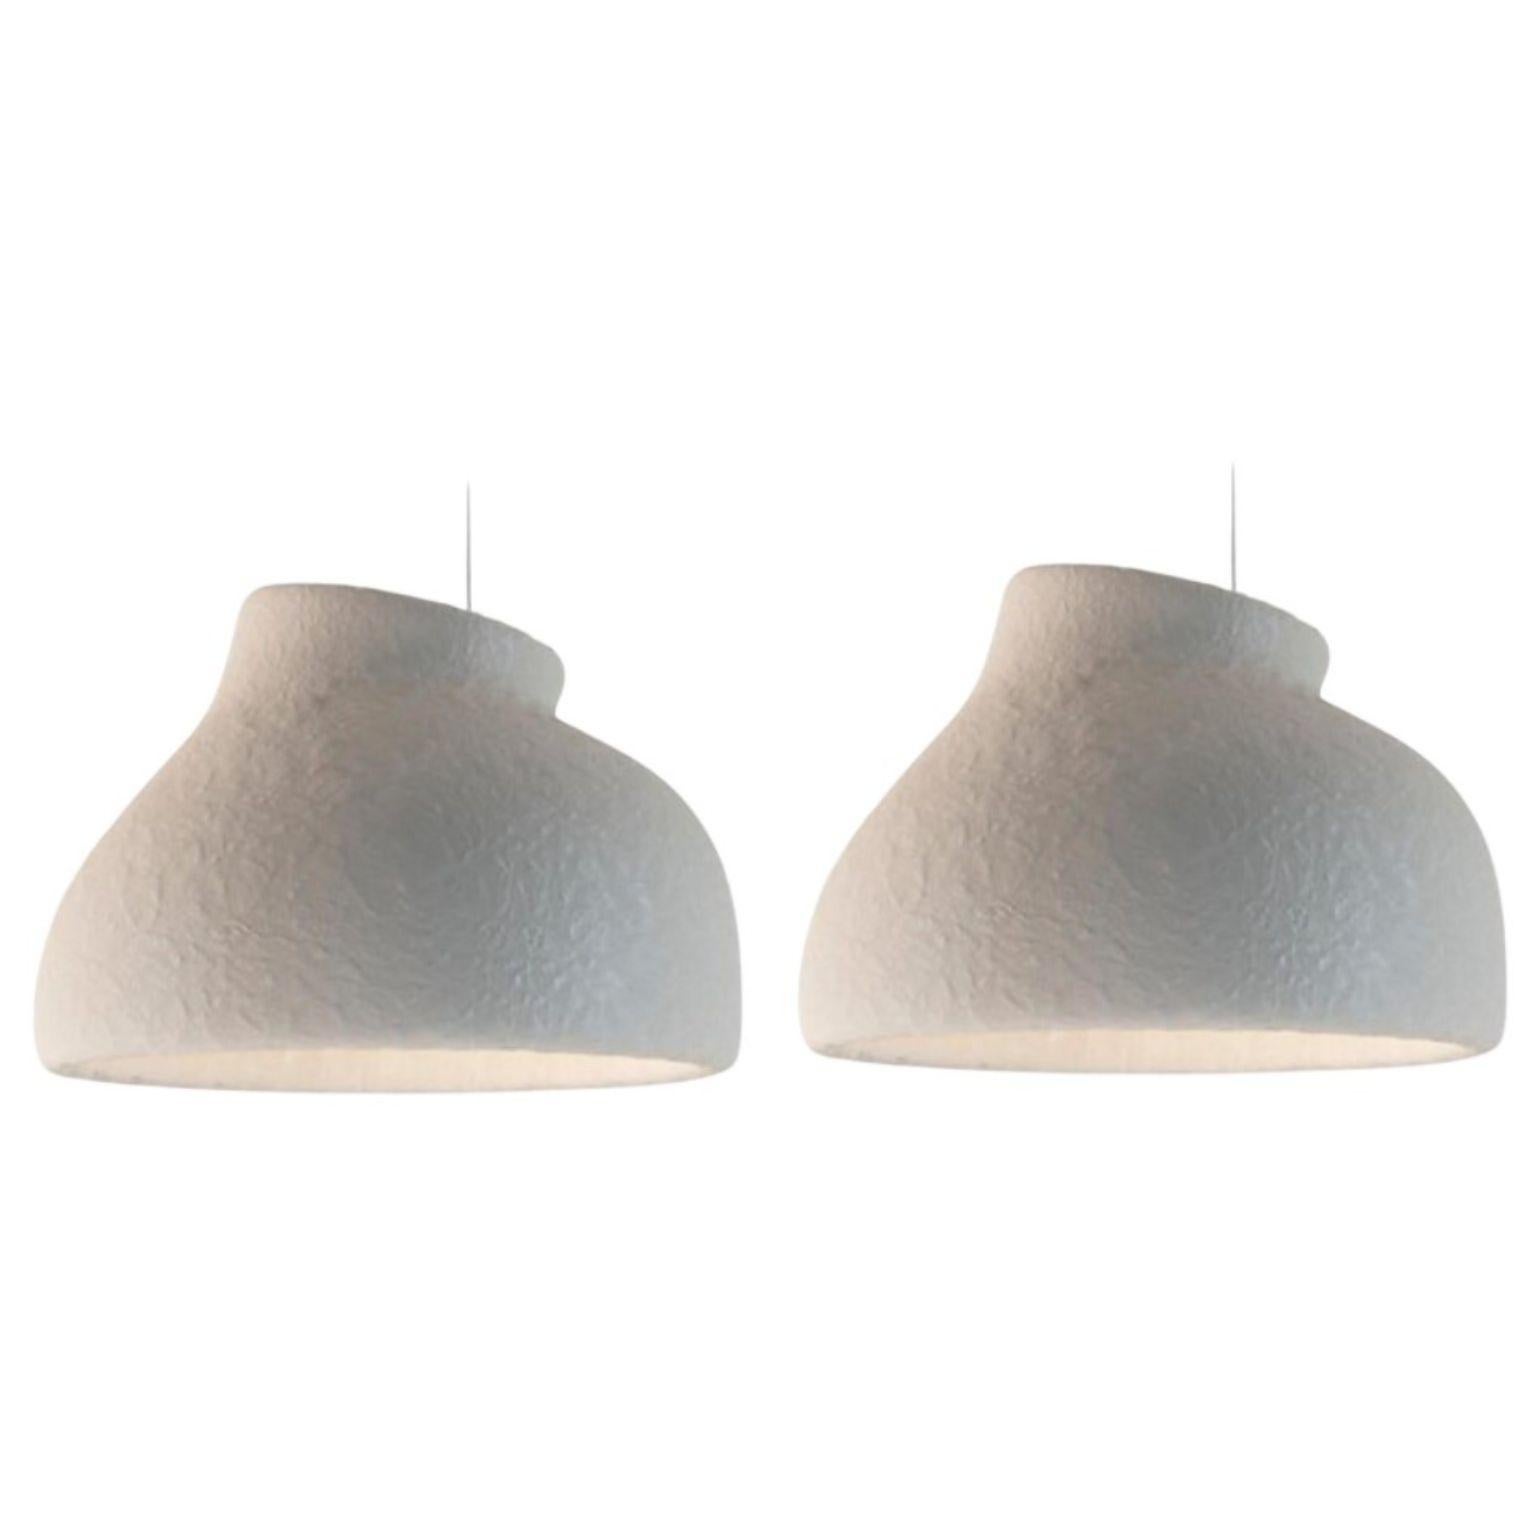 Set of 2 Small Pendant lamps by Faina
Design: Victoriya Yakusha
Materials: A blend of upcycled steel, flax frubber, wood chips, cellulose, and Clay all with Biopolymer cover
Dimensions: D 60 x H 43 cm
Available in 12 colours.

SONIAH tends